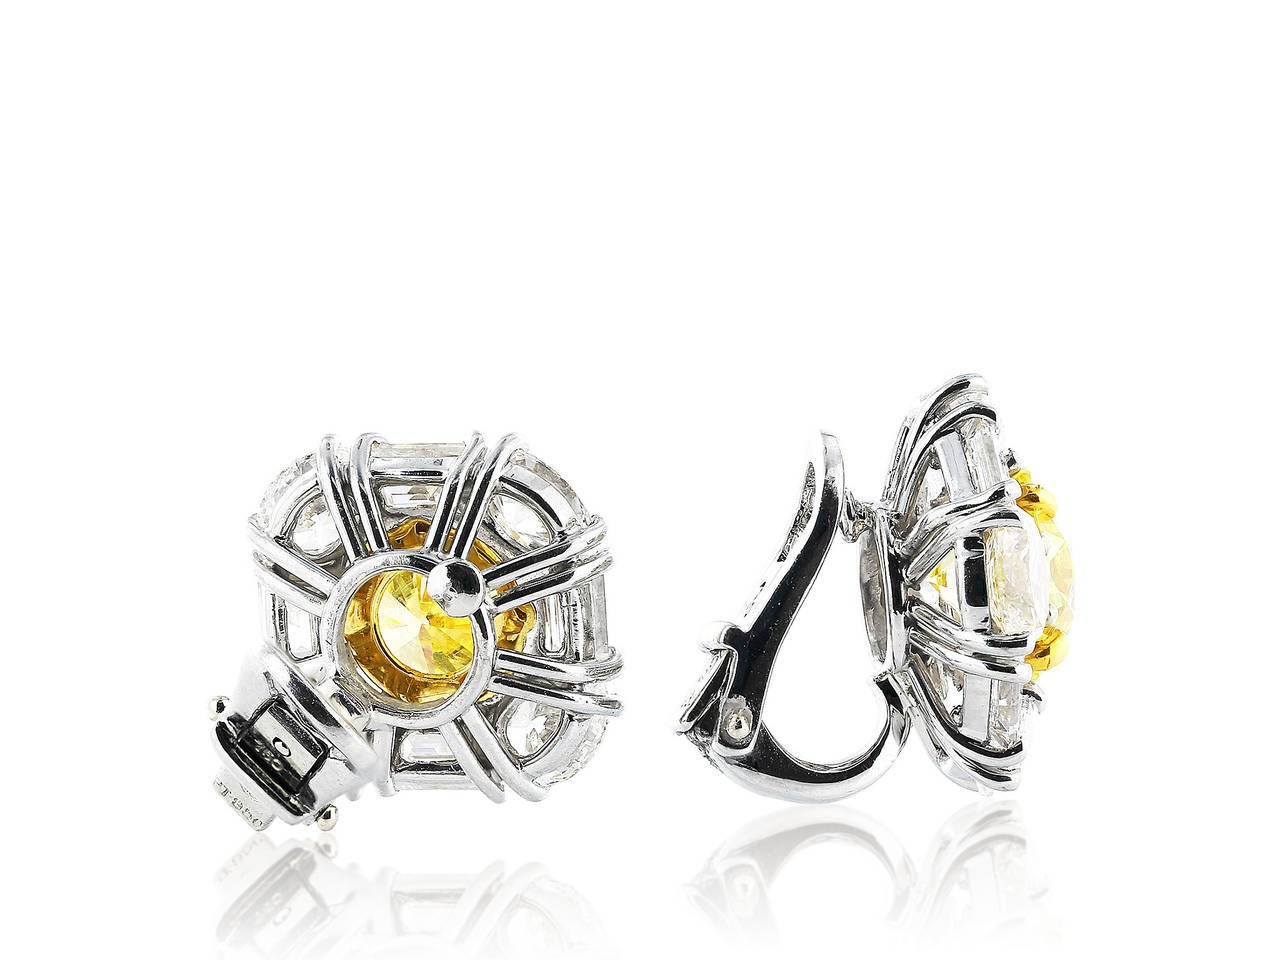 One pair of custom made platinum and 18 karat yellow gold earrings consisting of one natural round brilliant cut canary diamond weighing 1.77 carats having a color and clarity of FY/VS1 with GIA certificate #14460421, and one natural round brilliant